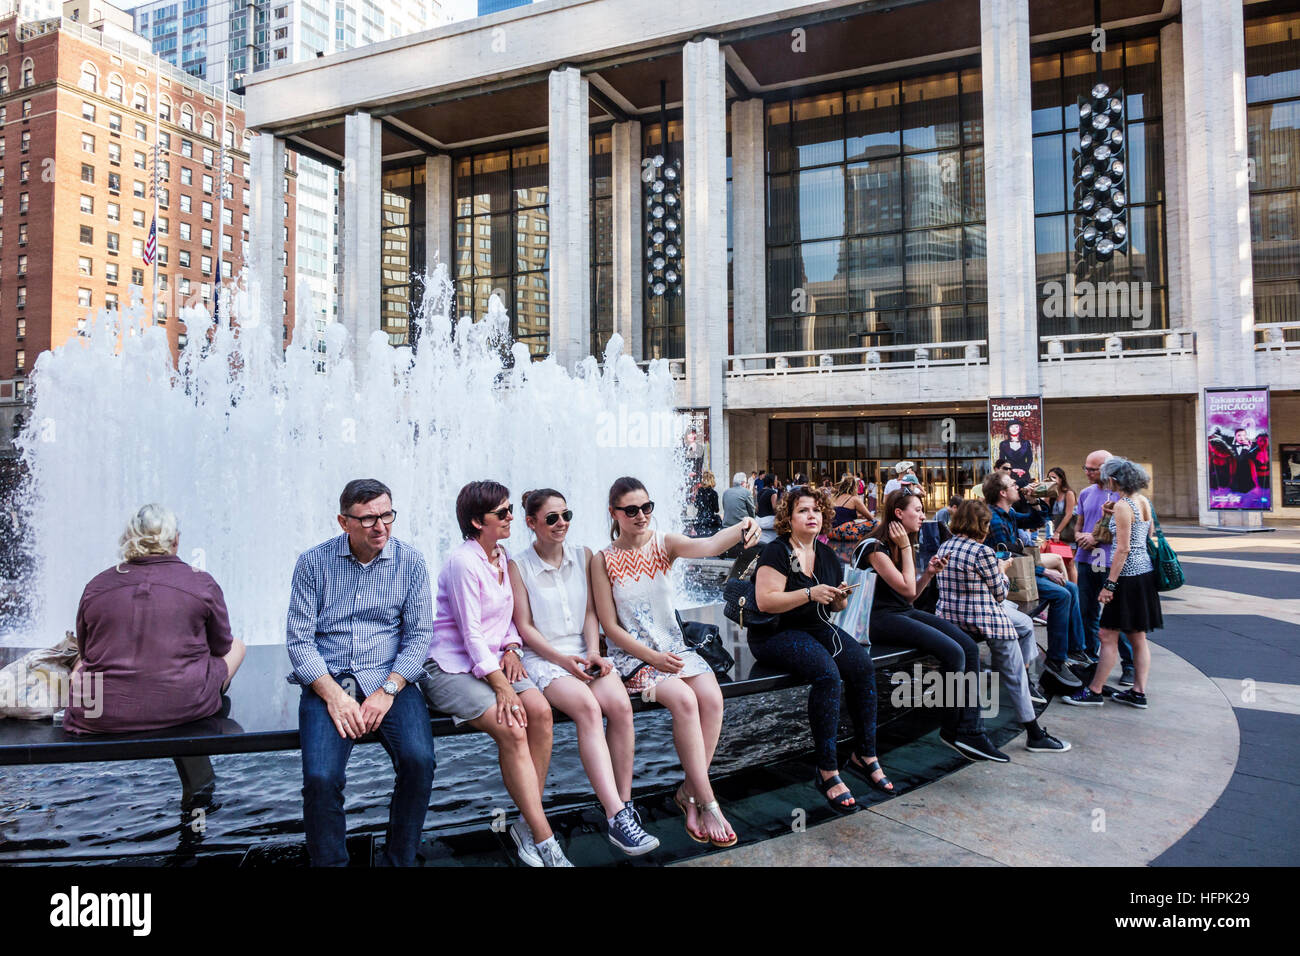 New York City, NY NYC Manhattan, Lincoln Square, Lincoln Center Plaza, PAC, fontaine, adulte, adultes, homme hommes, femme femmes, assis, selfie, fontaine, N Banque D'Images